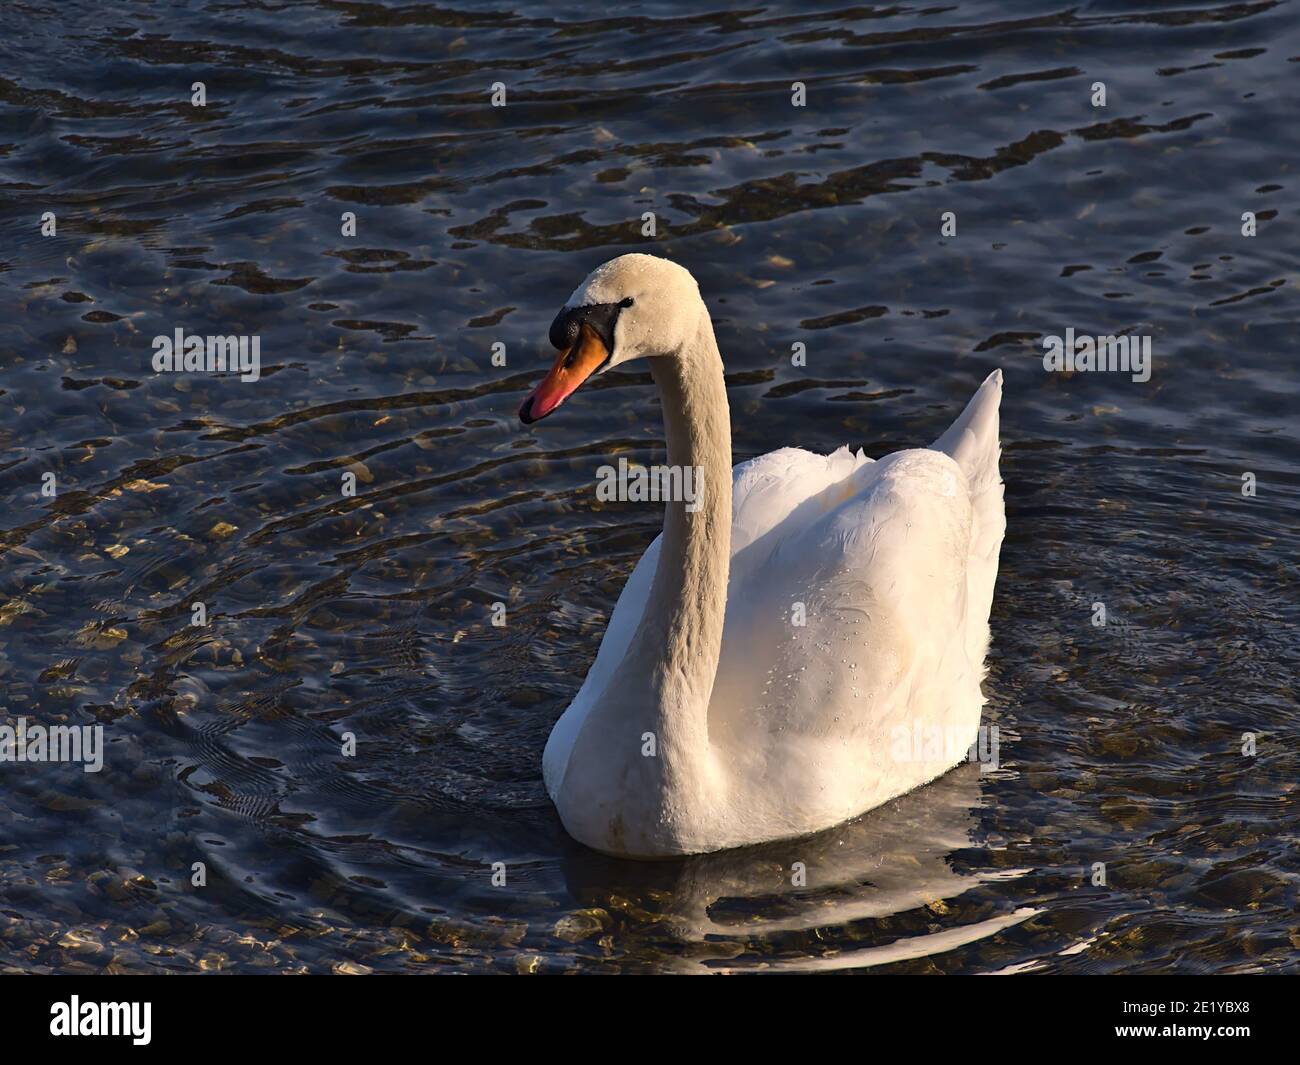 Closeup view of graceful mute swan (cygnus olor) with white plumage and orange beak at the shore of Danube River in Sigmaringen, Germany. Stock Photo